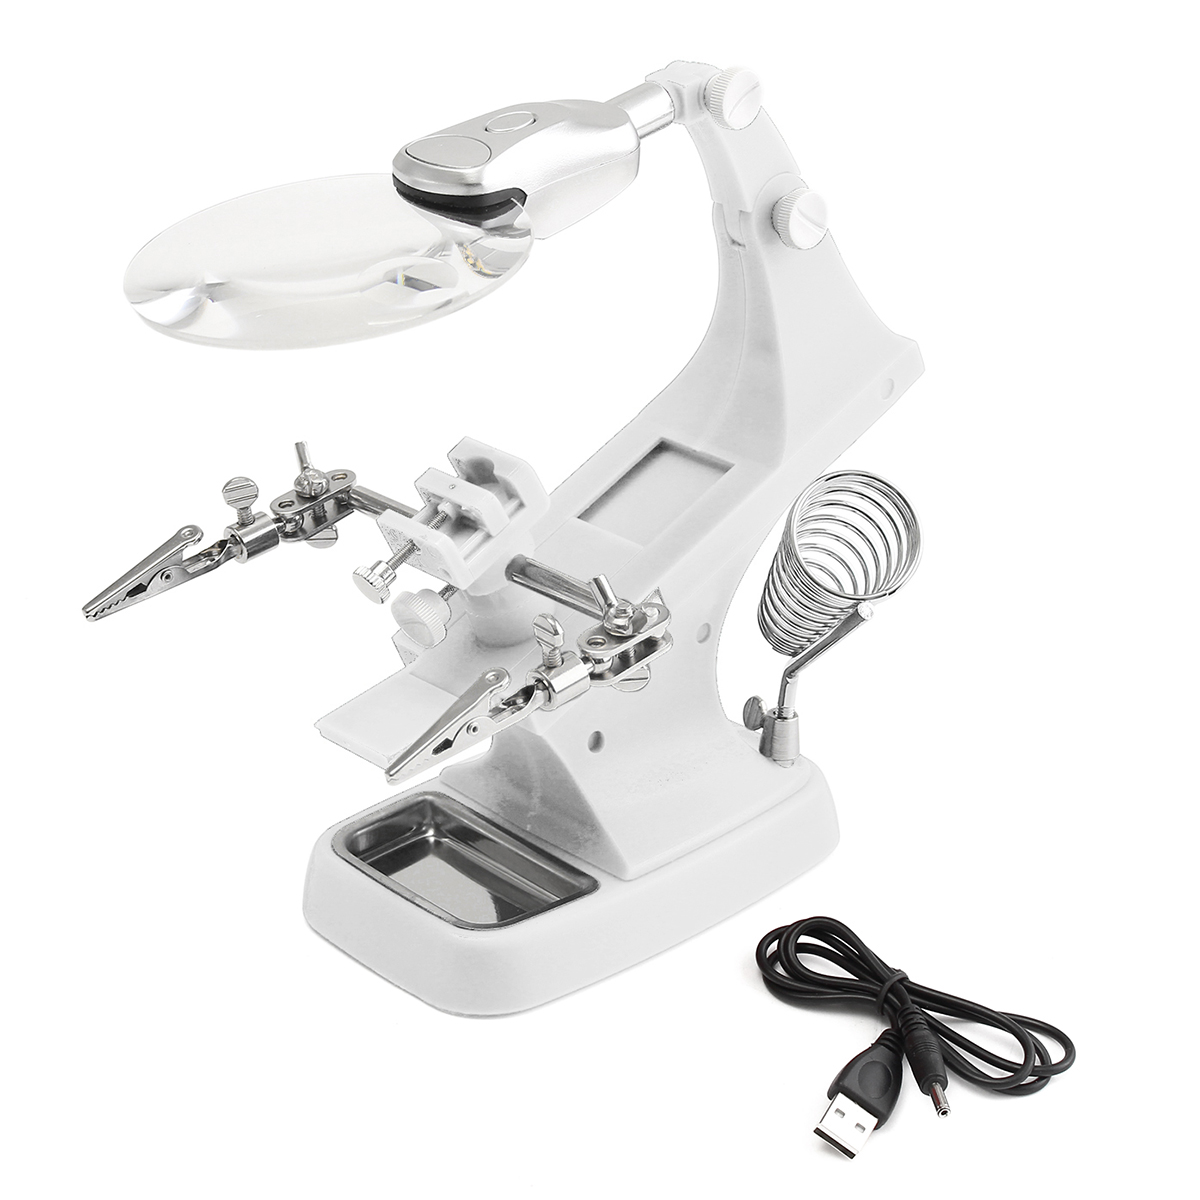 3X45X-Helping-Hand-Soldering-Welding-Stand-Magnifier-LED-With-Alligator-Clip-1127969-4